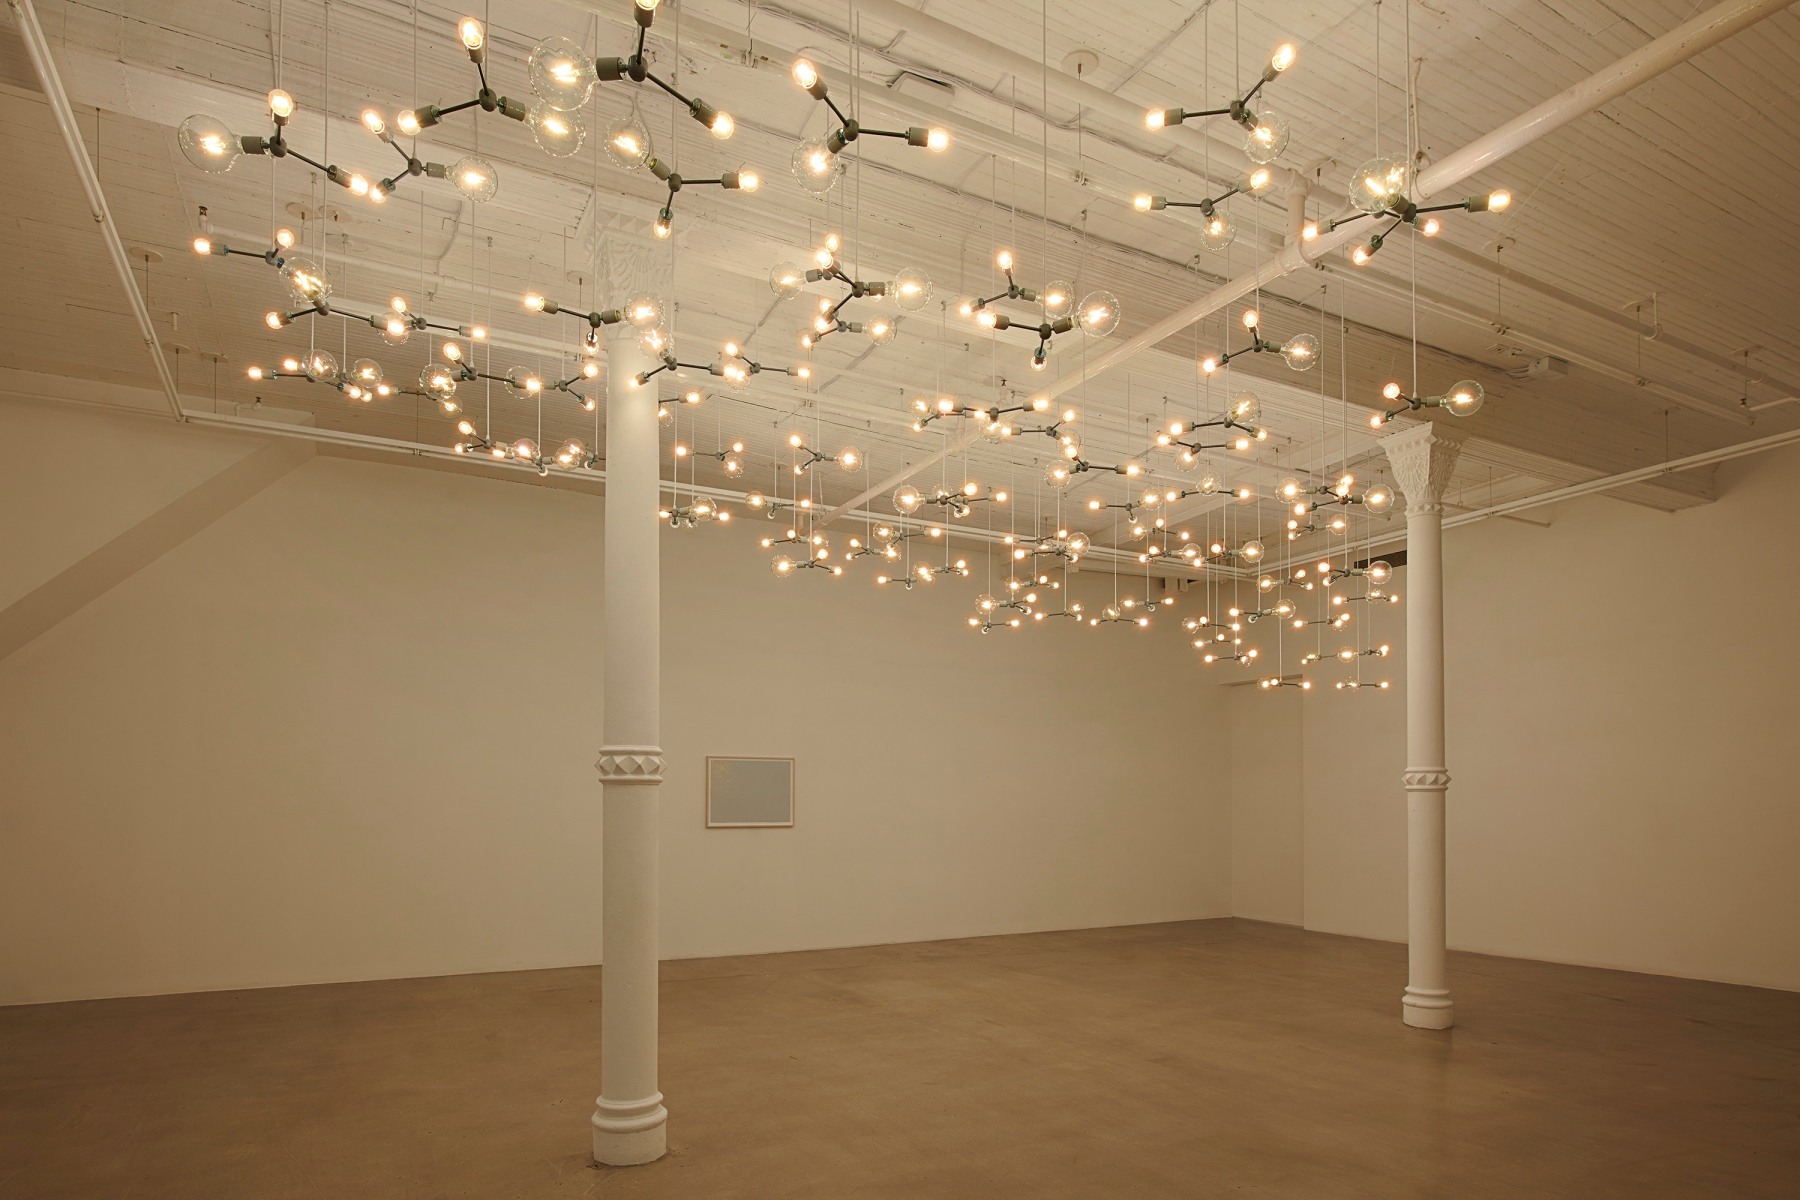 Image of SPENCER FINCH's Cloud (H2O), 2006